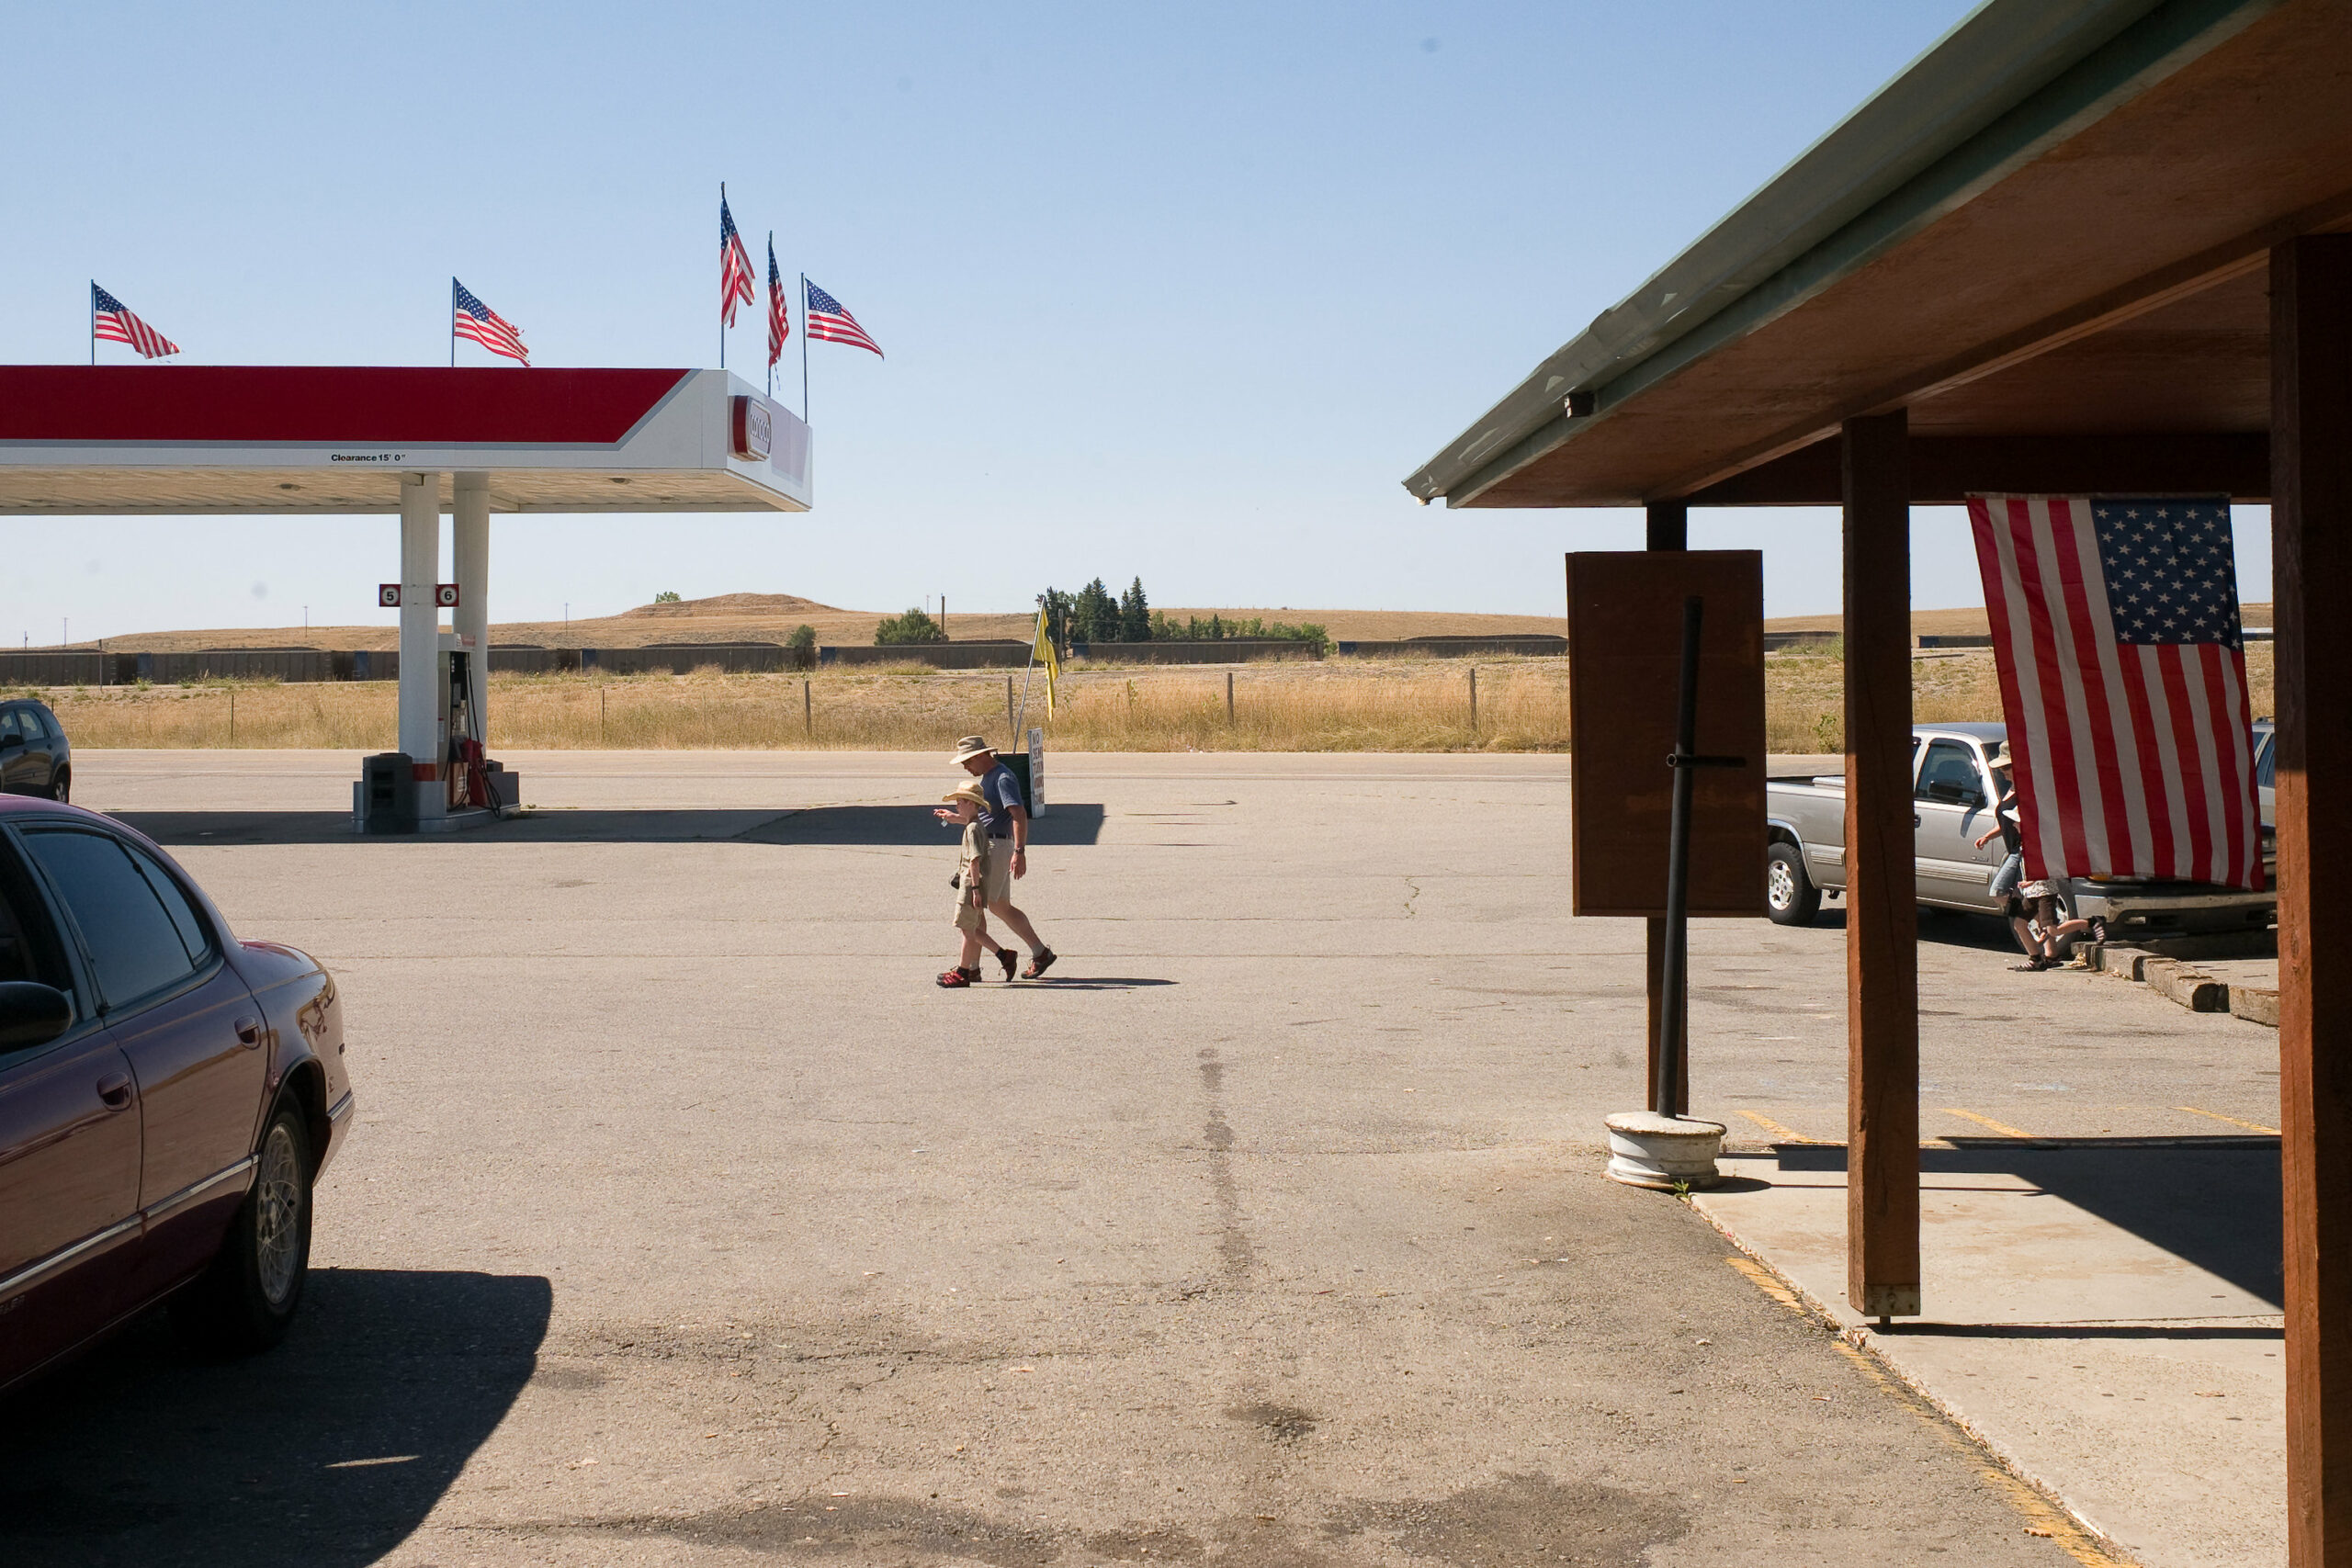 tourists walking outside at a gas station and museum site with American flags at the Little Bighorn site in Garryowen Montana